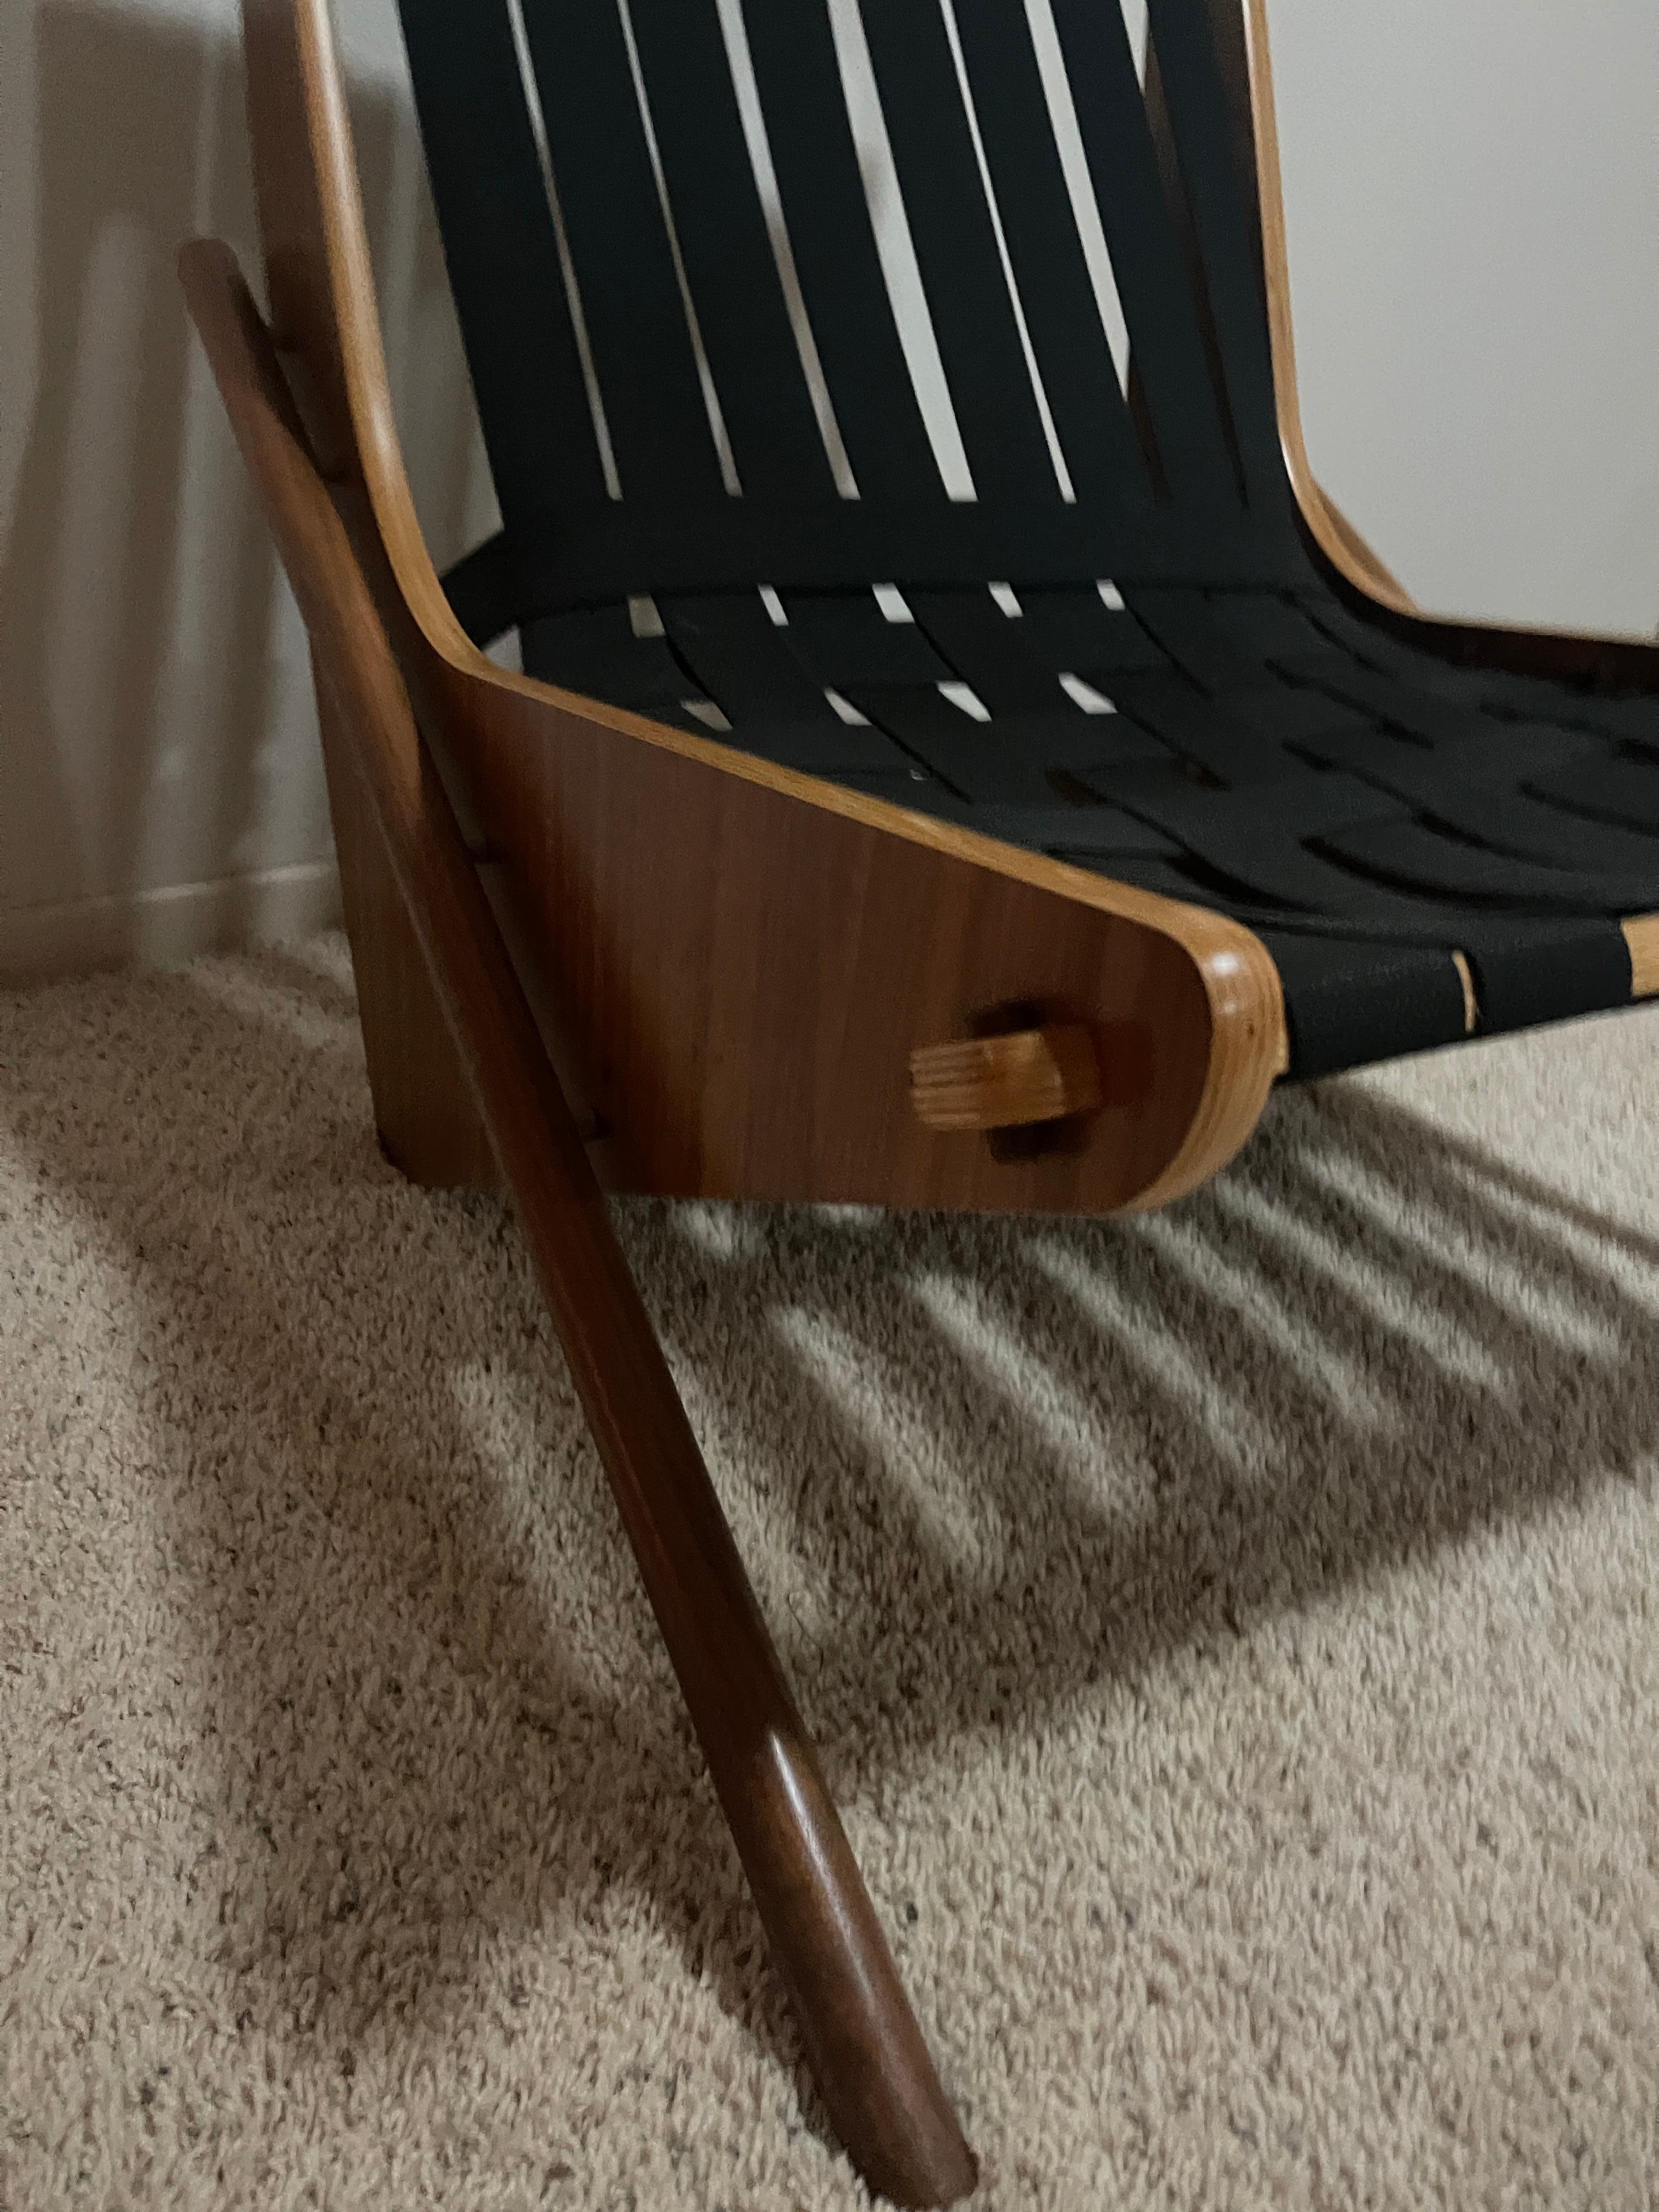 limited edition No. 81 of 100

Richard Neutra believed that architecture should serve as a catalyst for social betterment. When he developed the San Pedro, Calif. Channel Heights Housing project in 1942, he also designed the Boomerang Chair which